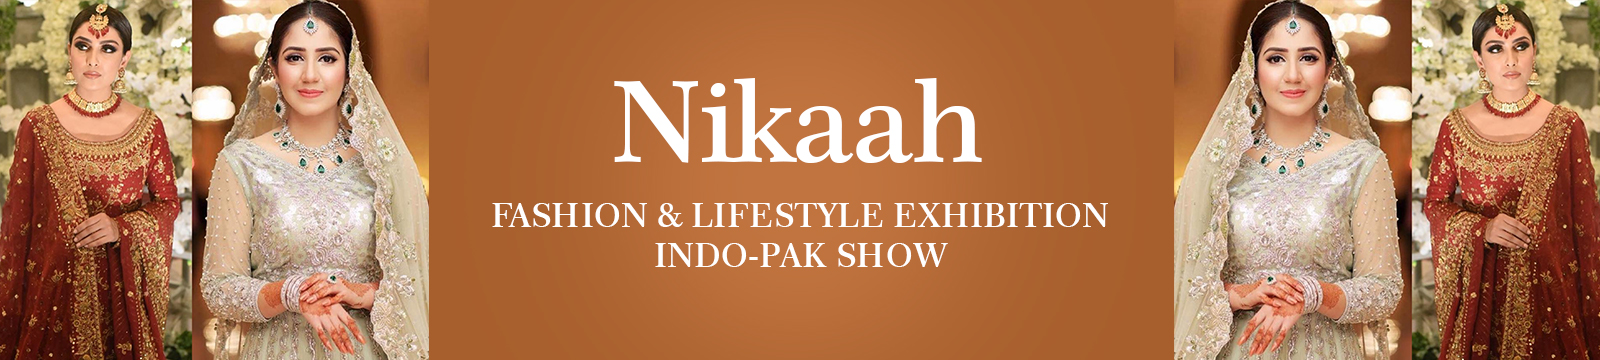 Indo-Pak Exhibitions Are The Flavour of The Month